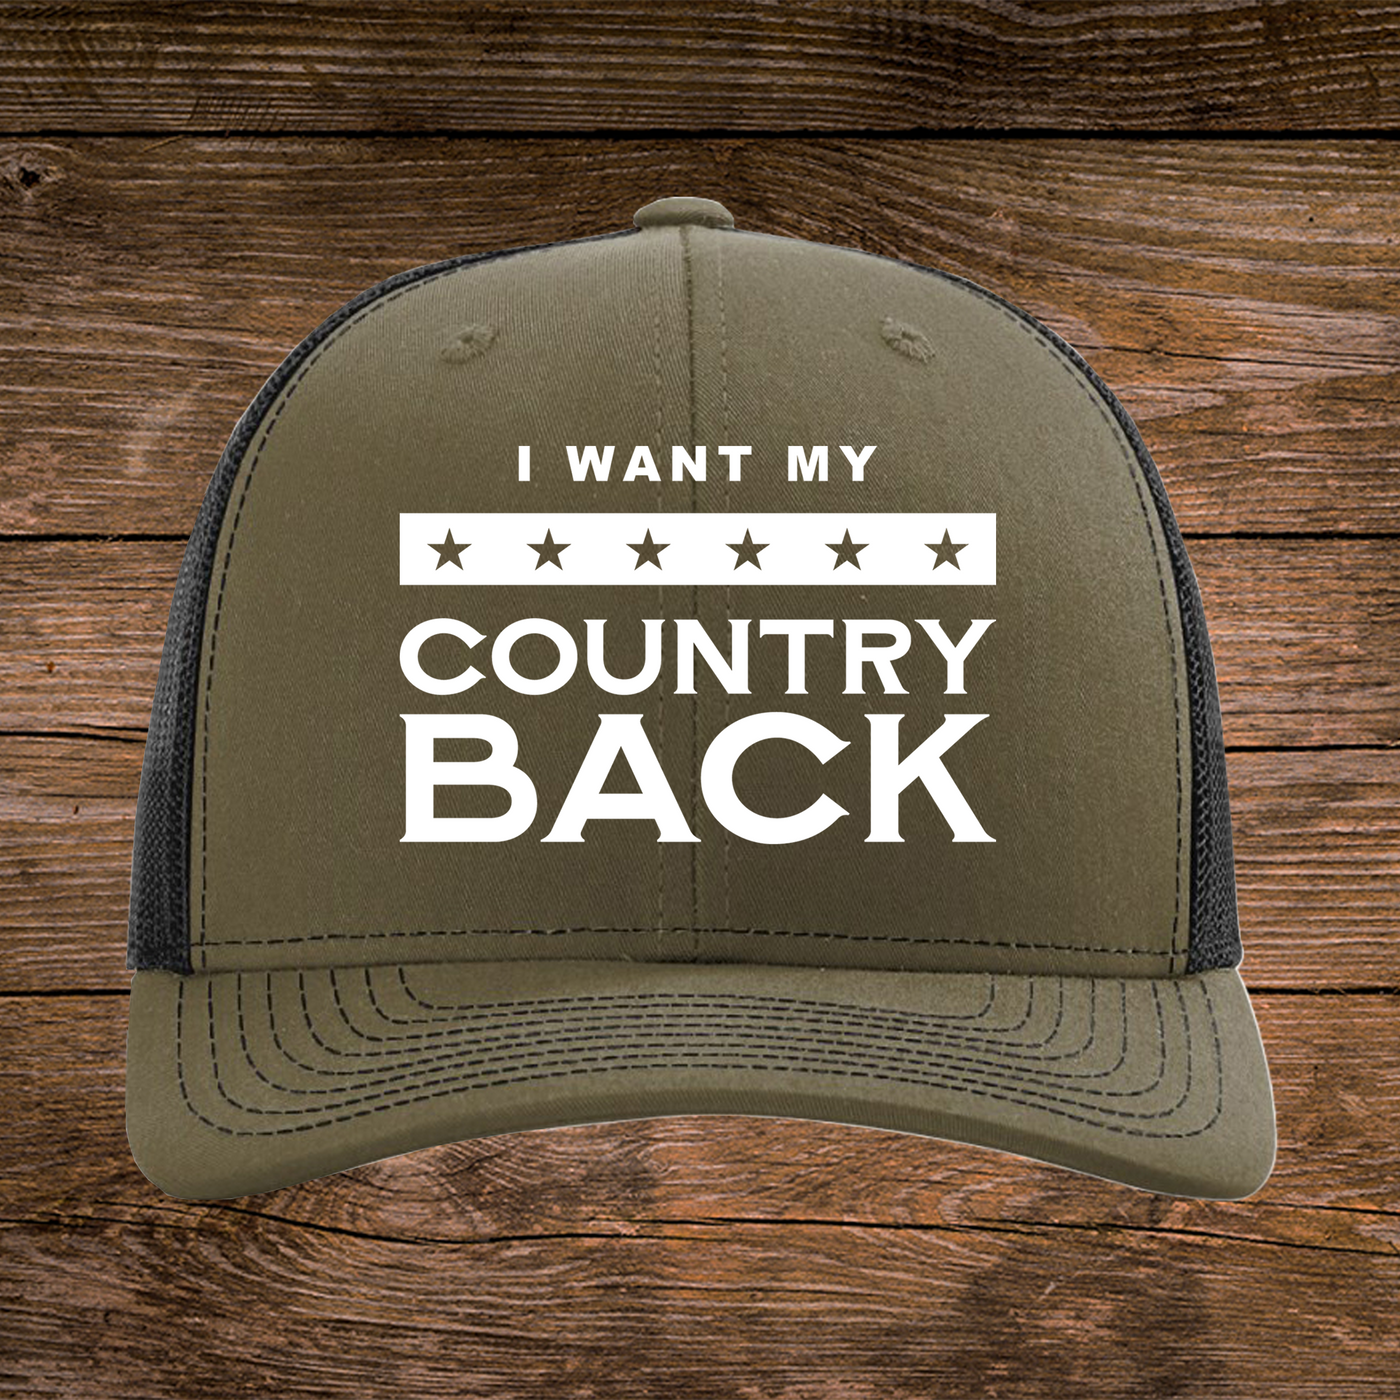 COUNTRY BACK Mid-Profile Hat, Army Green - Alexis Wilkins Official Merchandise